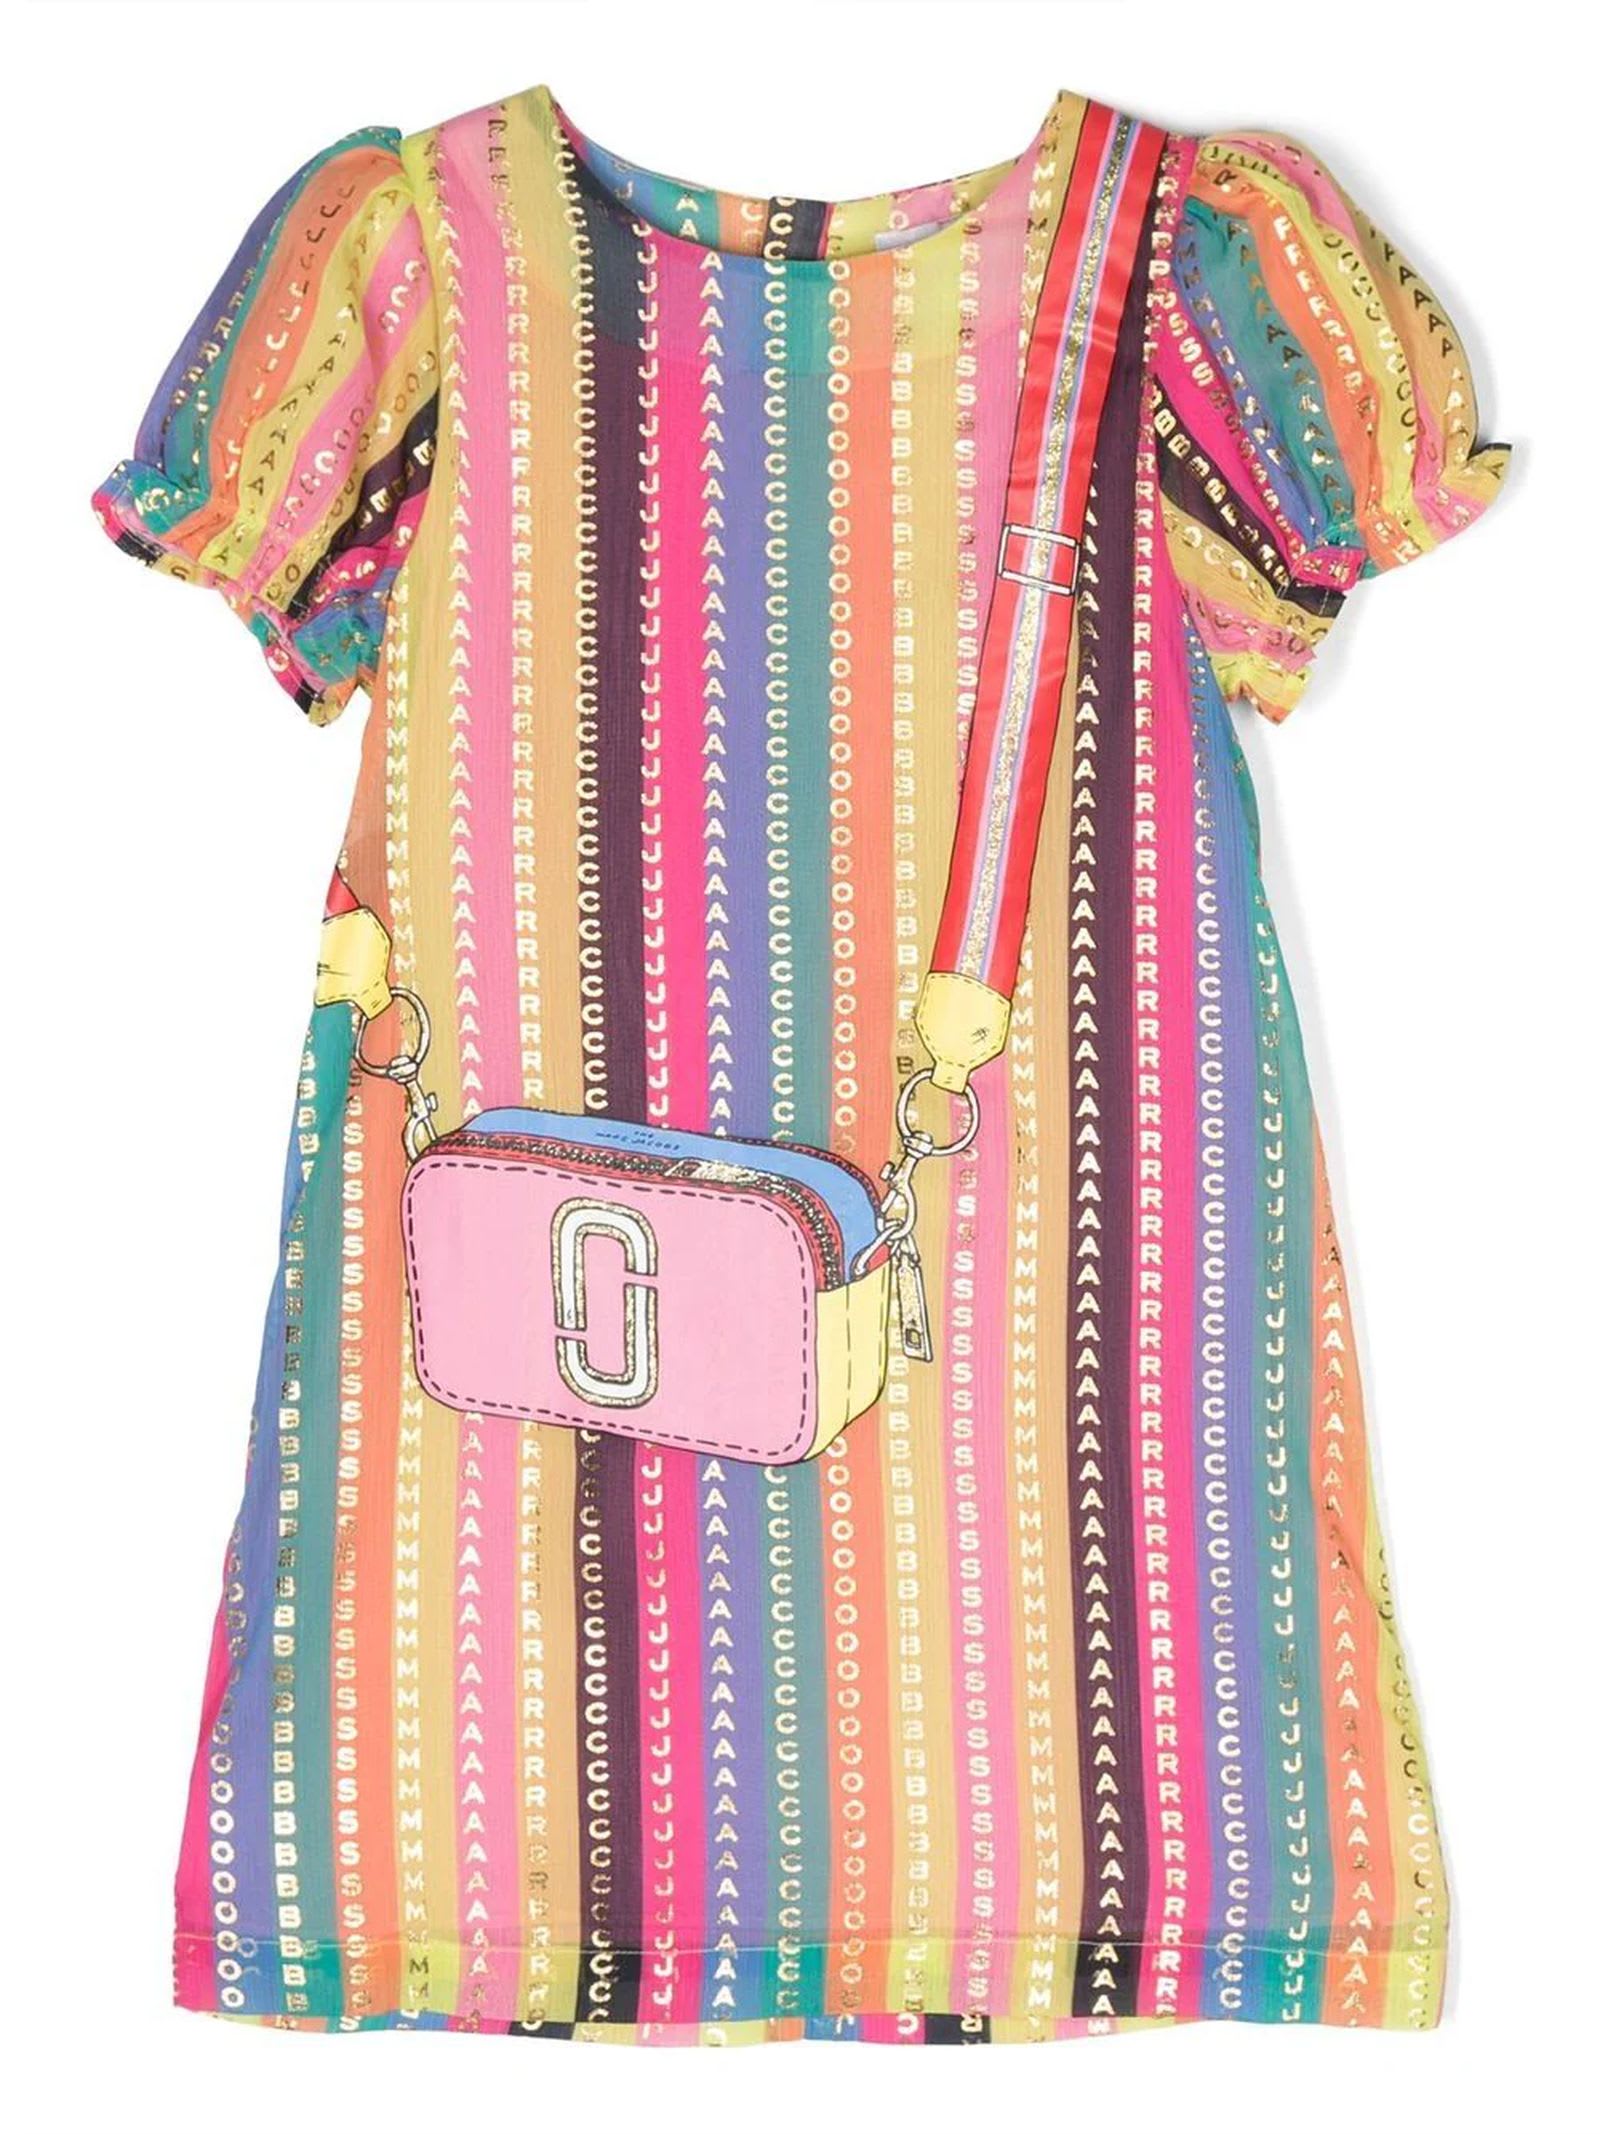 MARC JACOBS MULTICOLOR POLYESTER DRESS